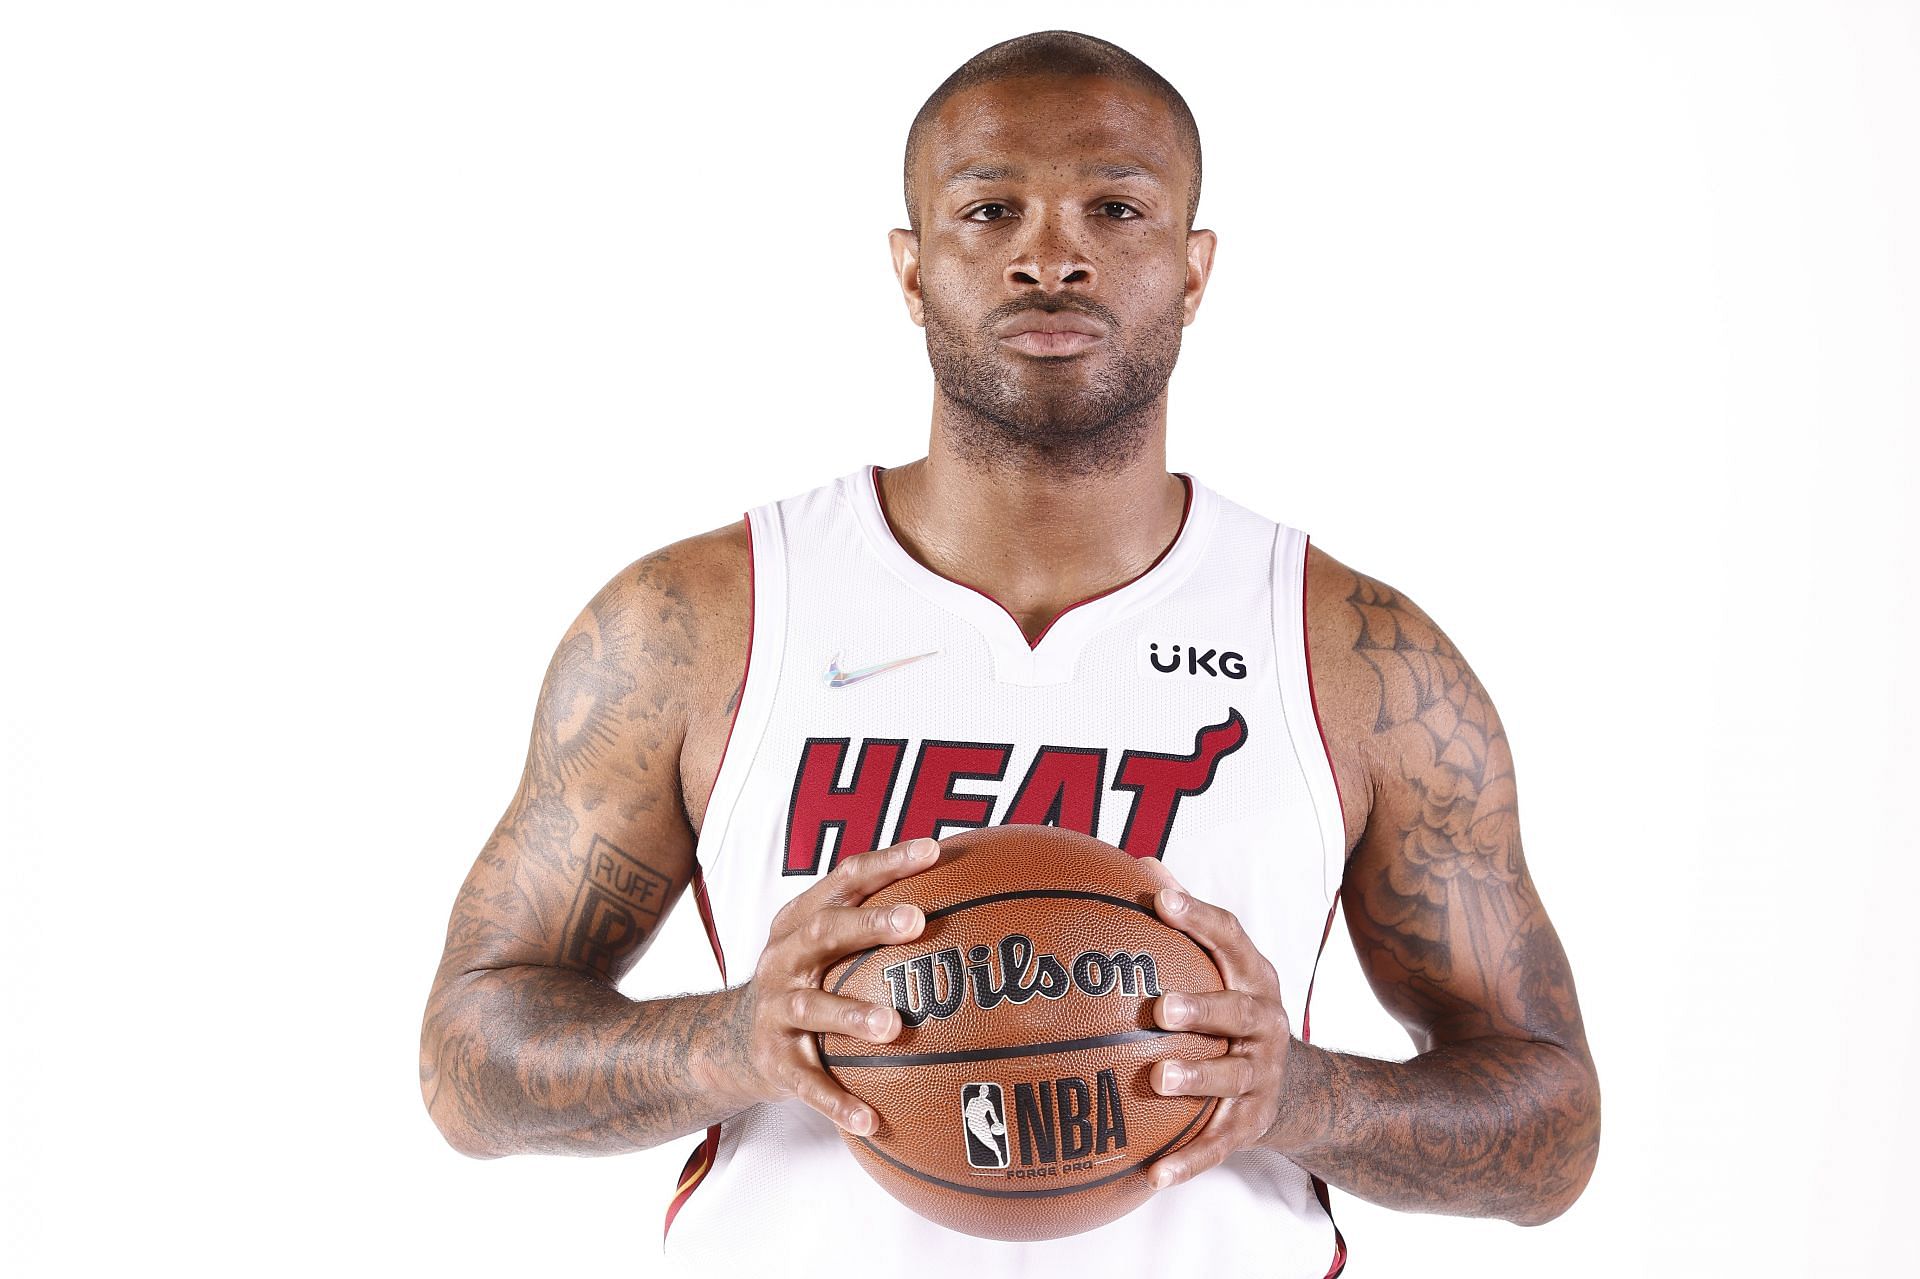 P.J. Tucker #17 of the Miami Heat poses for a photo during Media Day at FTX Arena on September 27, 2021 in Miami, Florida.